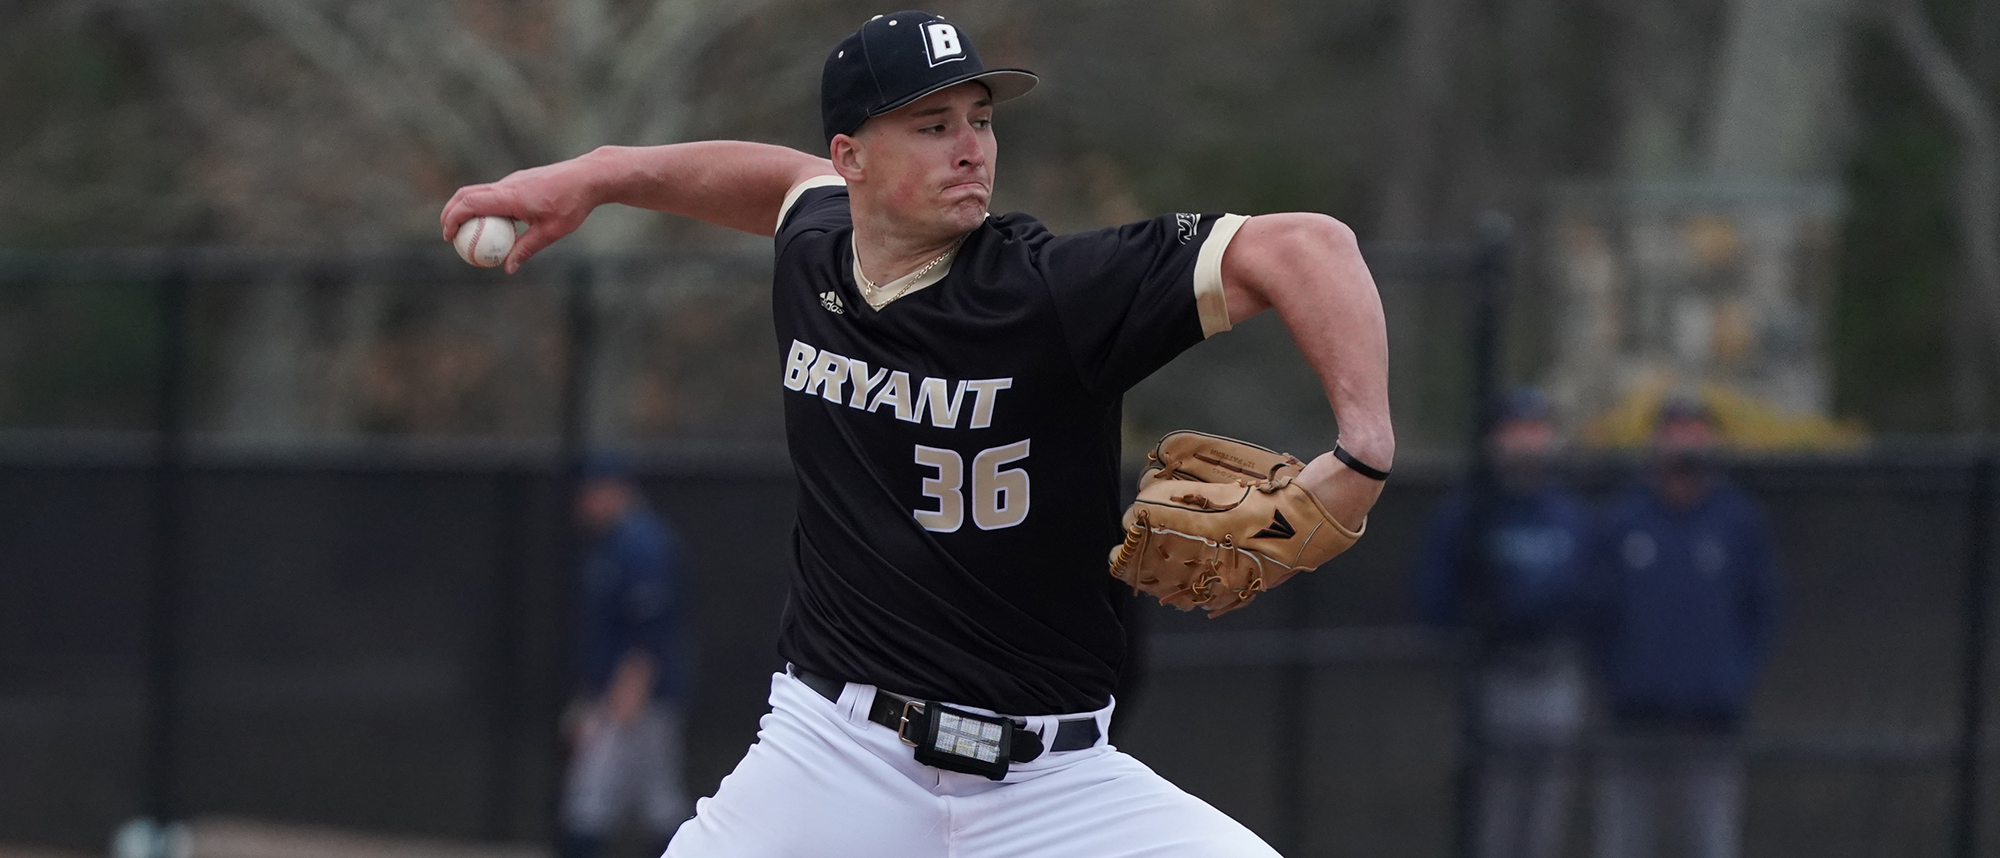 Bryant takes opener from LIU on windy Friday